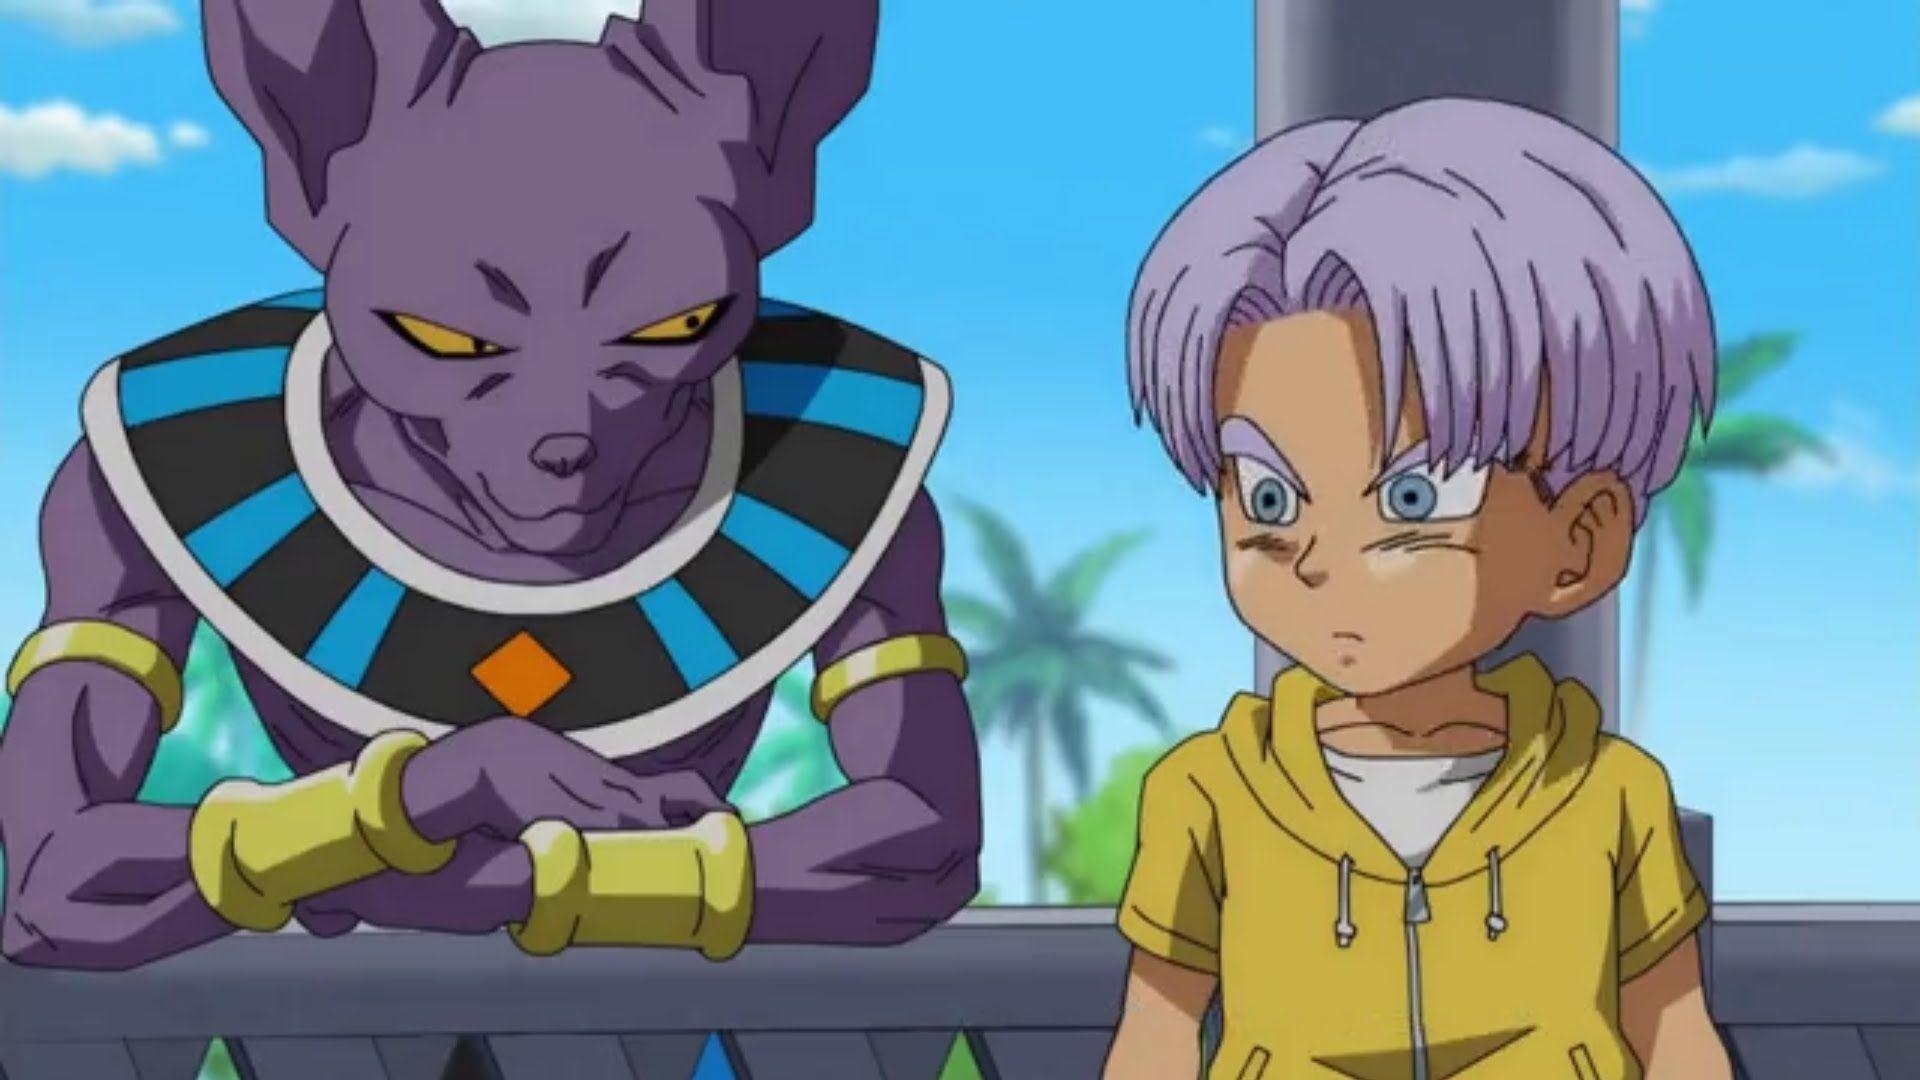 Kid Trunks Learns about Future Trunks. Dragon Ball Super Episode